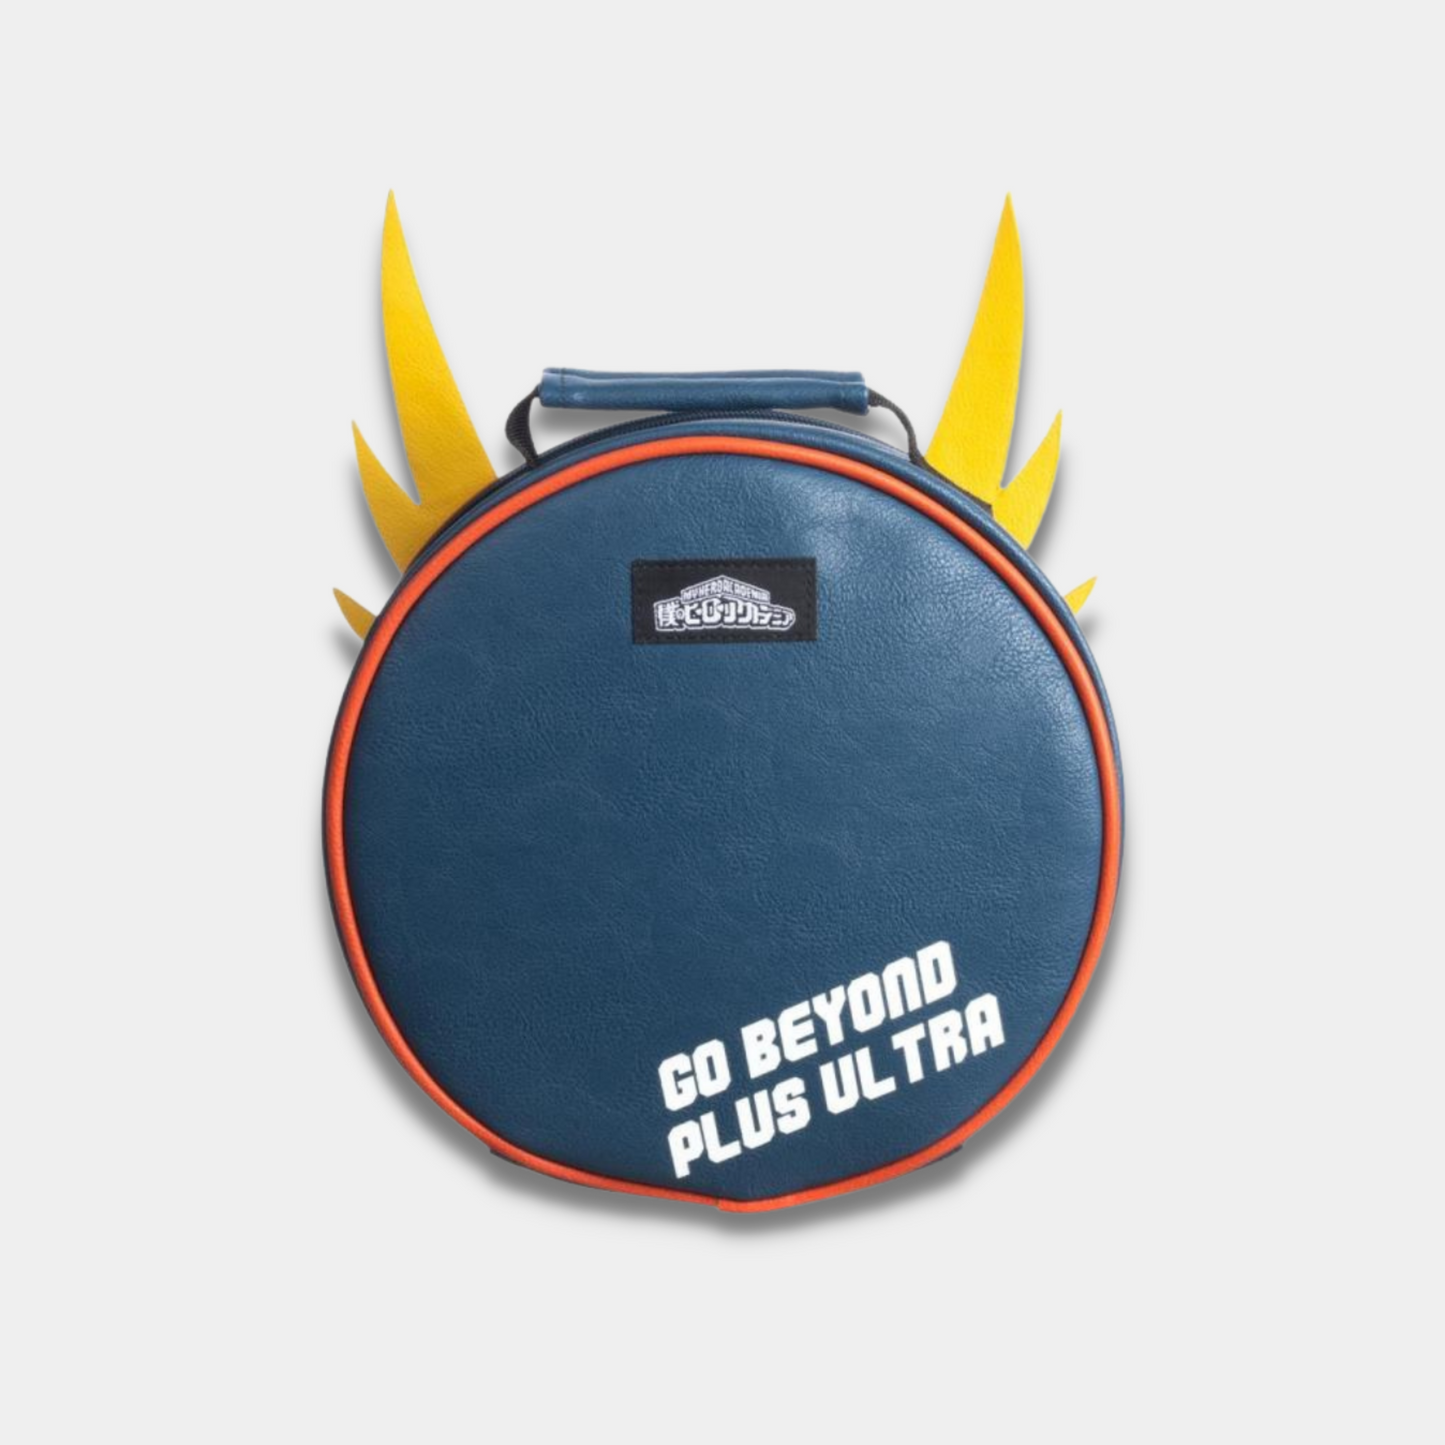 My Hero Academia All Might Die Cut Lunch Bag